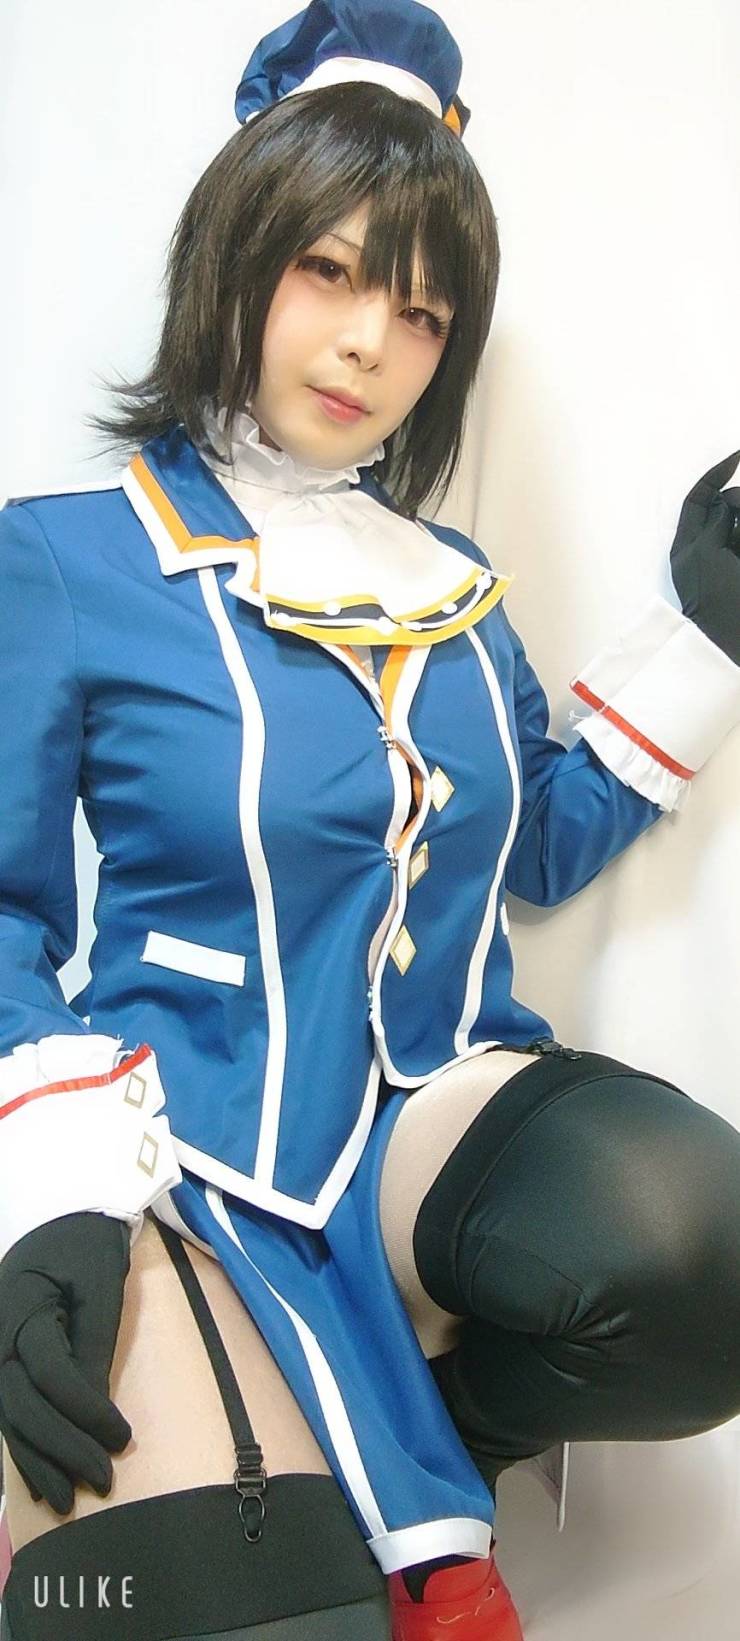 This Cosplayer Girl Is Actually A 30-Year-Old Guy!